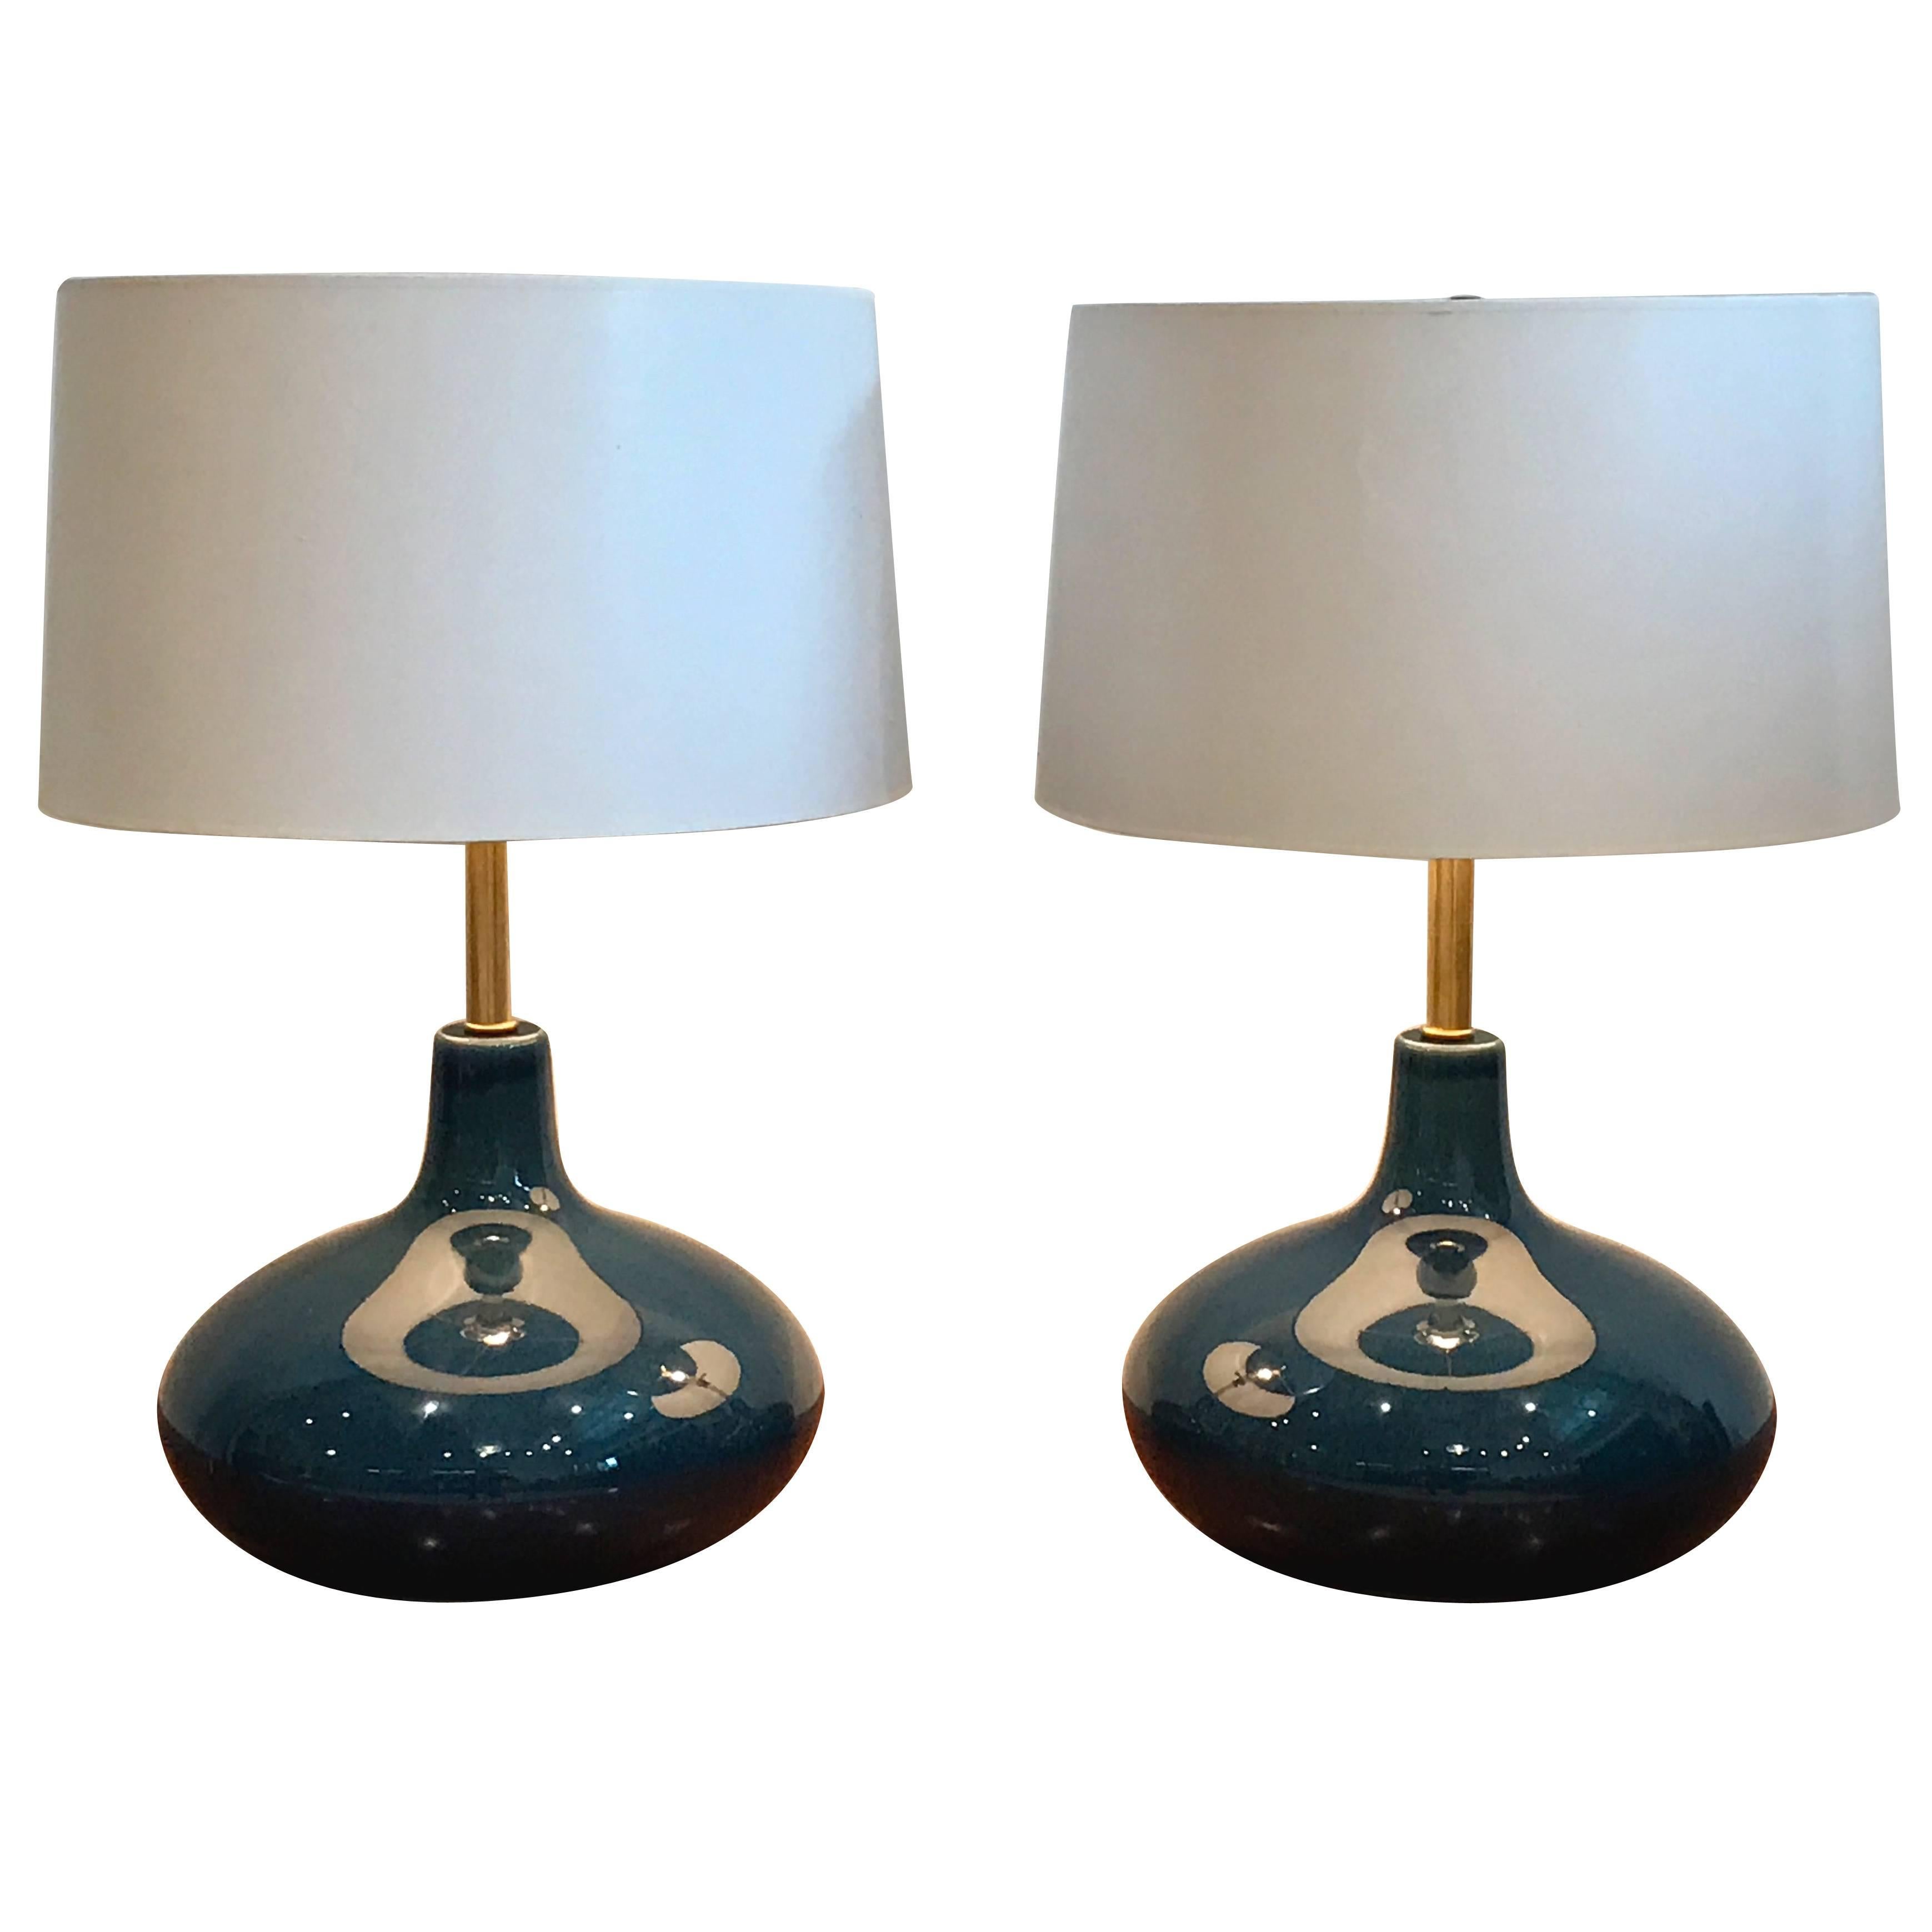 Pair of Mid-Century Modern Blue Glazed Ceramic Table Lamps, 1960s